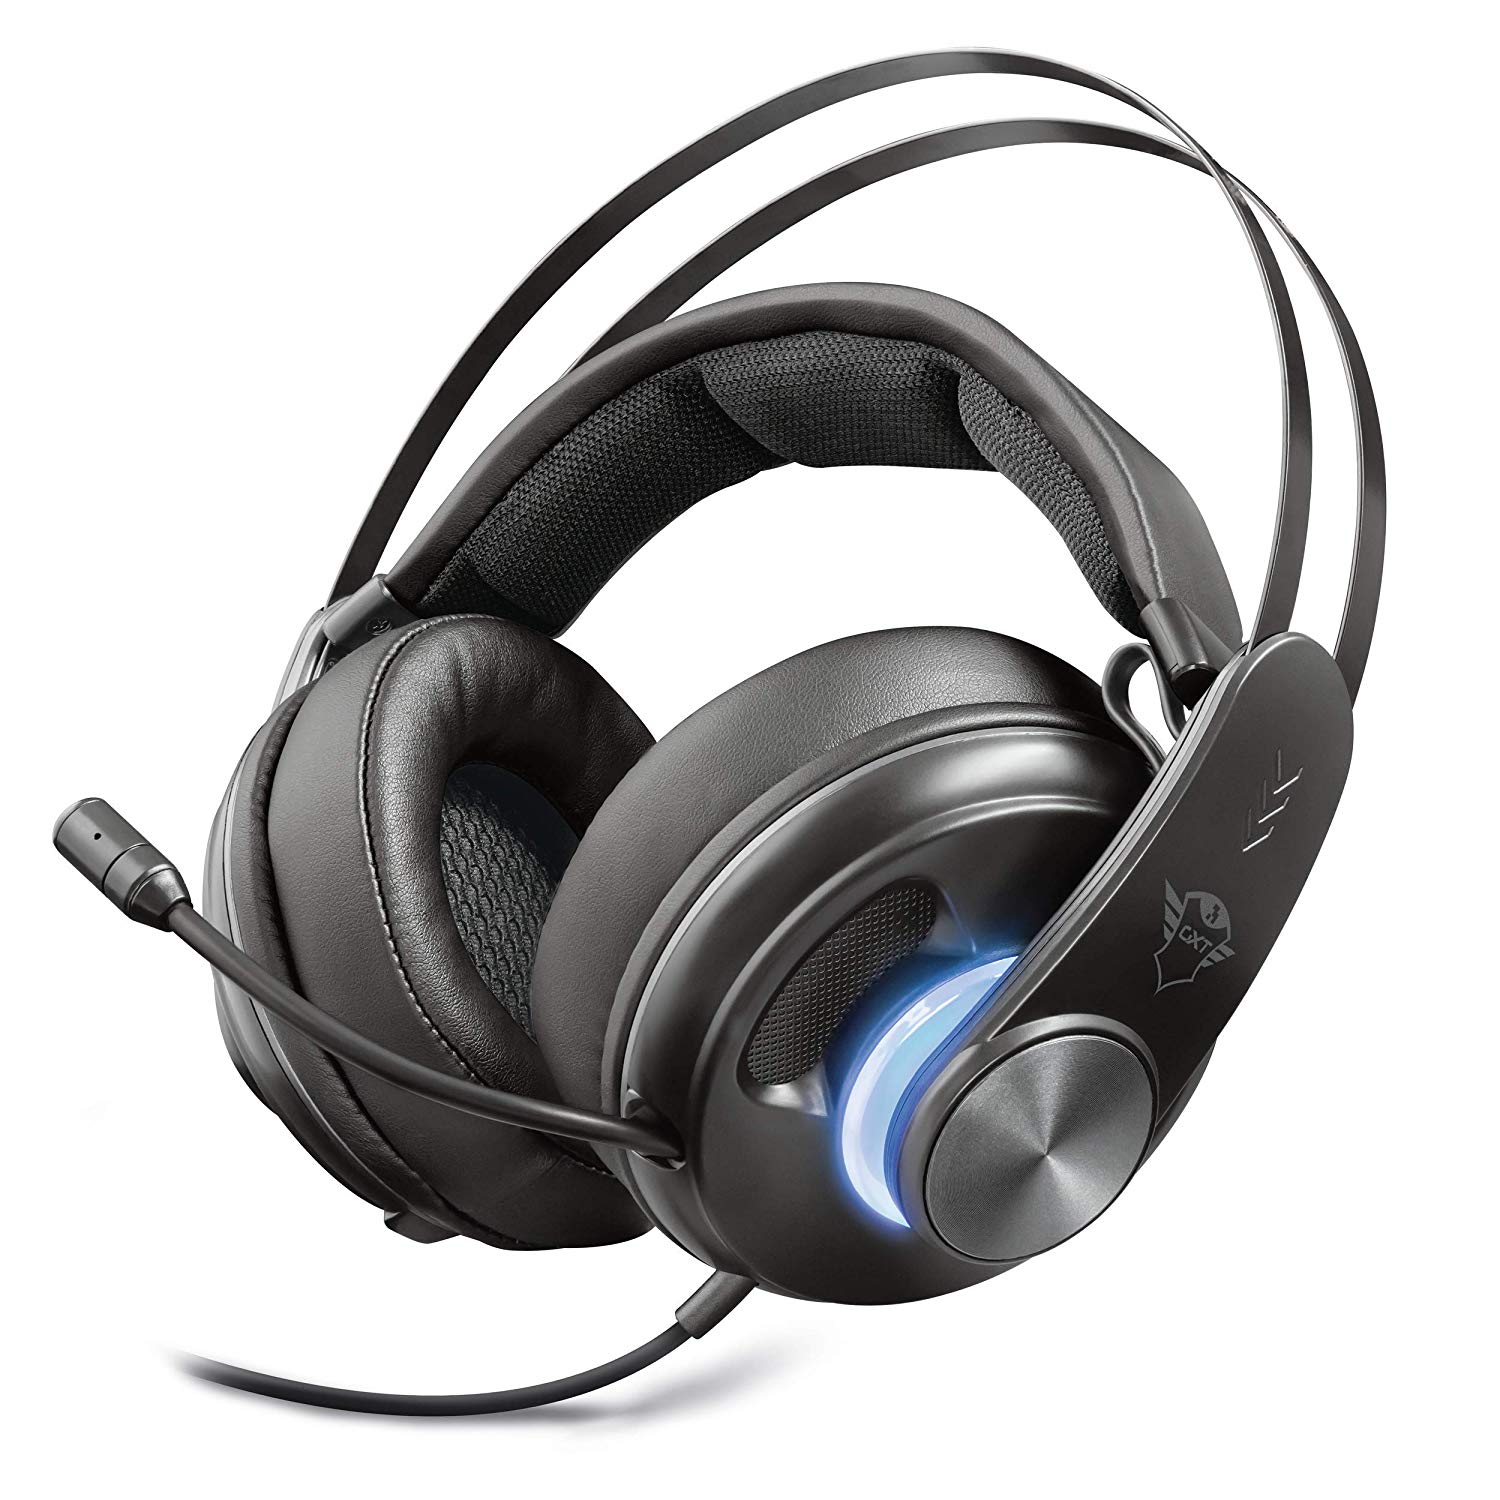 Auriculares Trust GXT 383 7.1 solo 50€